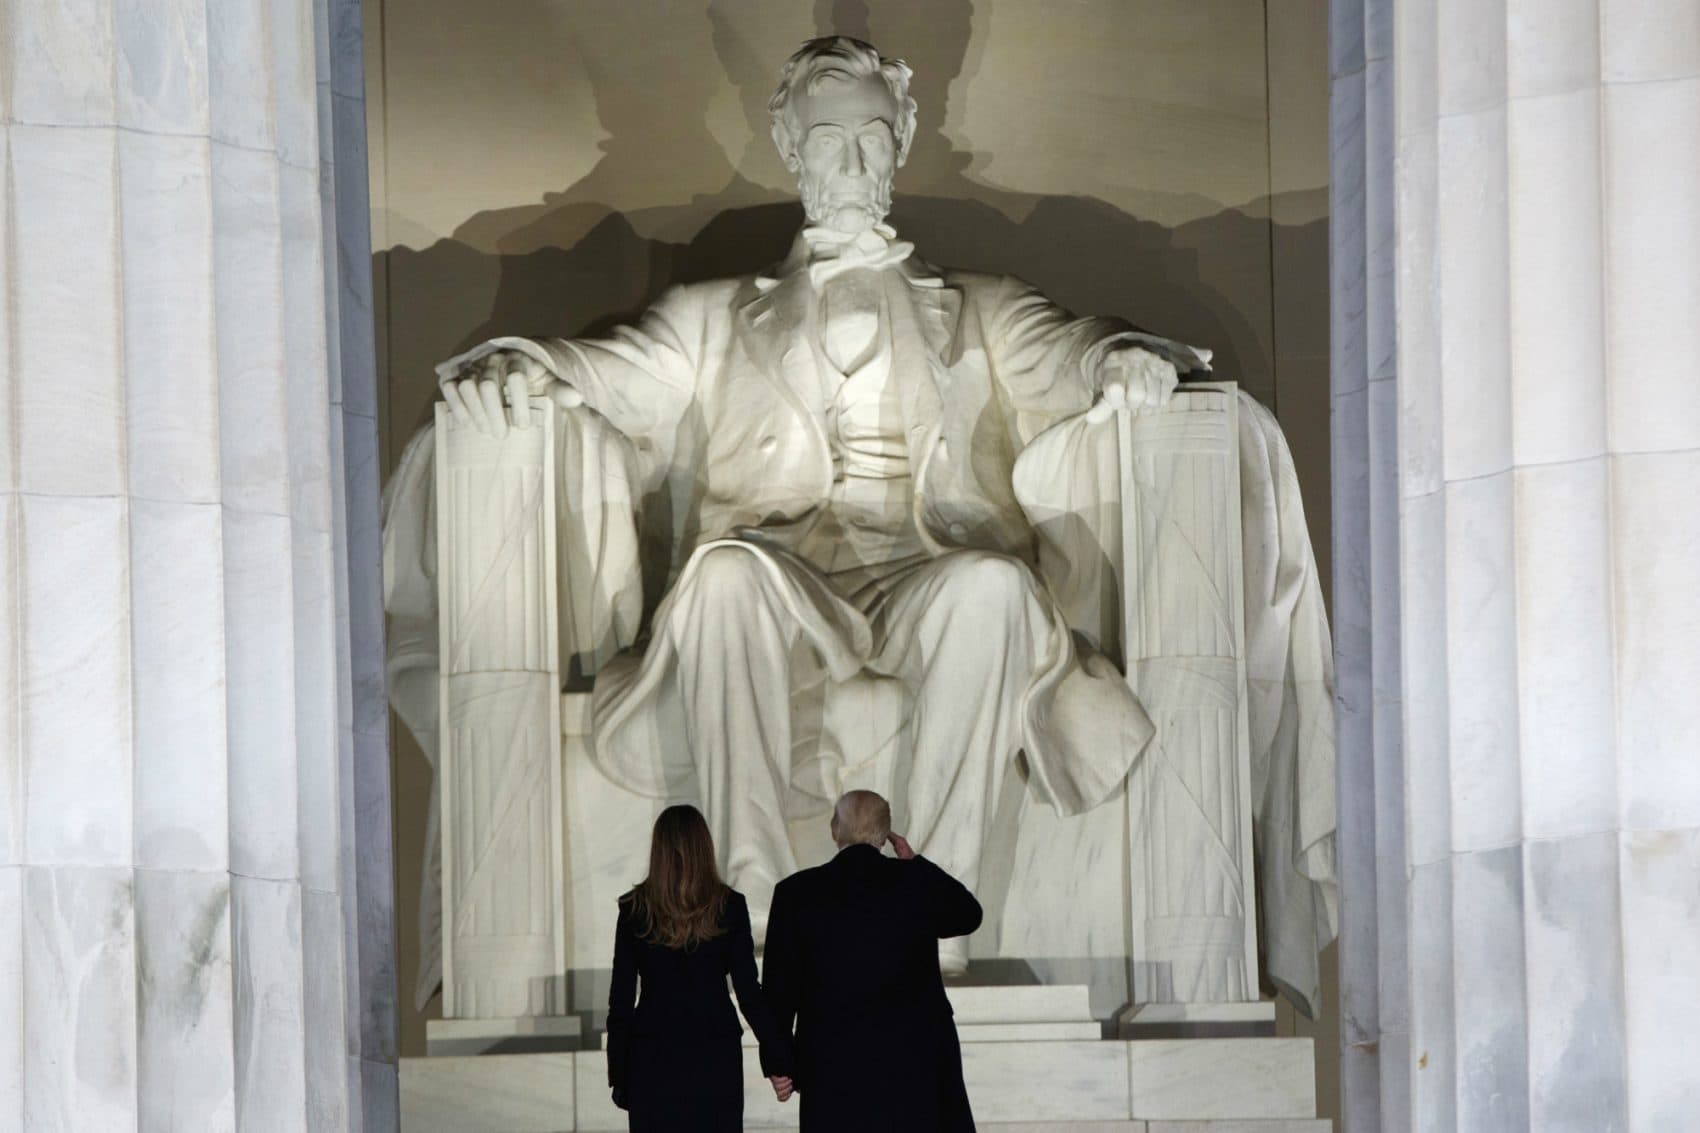 Presidents’ Day, writes Rich Barlow, is an apt time to reflect on Lincoln’s lessons for the modern GOP, led by a president who pays lip service to his blue-collar base while pushing ideas that would hurt it.
Pictured: President-elect Donald Trump, right, salutes as he arrives with his wife Melania Trump to the &quot;Make America Great Again Welcome Concert&quot; at the Lincoln Memorial, Thursday, Jan. 19, 2017, in Washington. (Evan Vucci/AP)